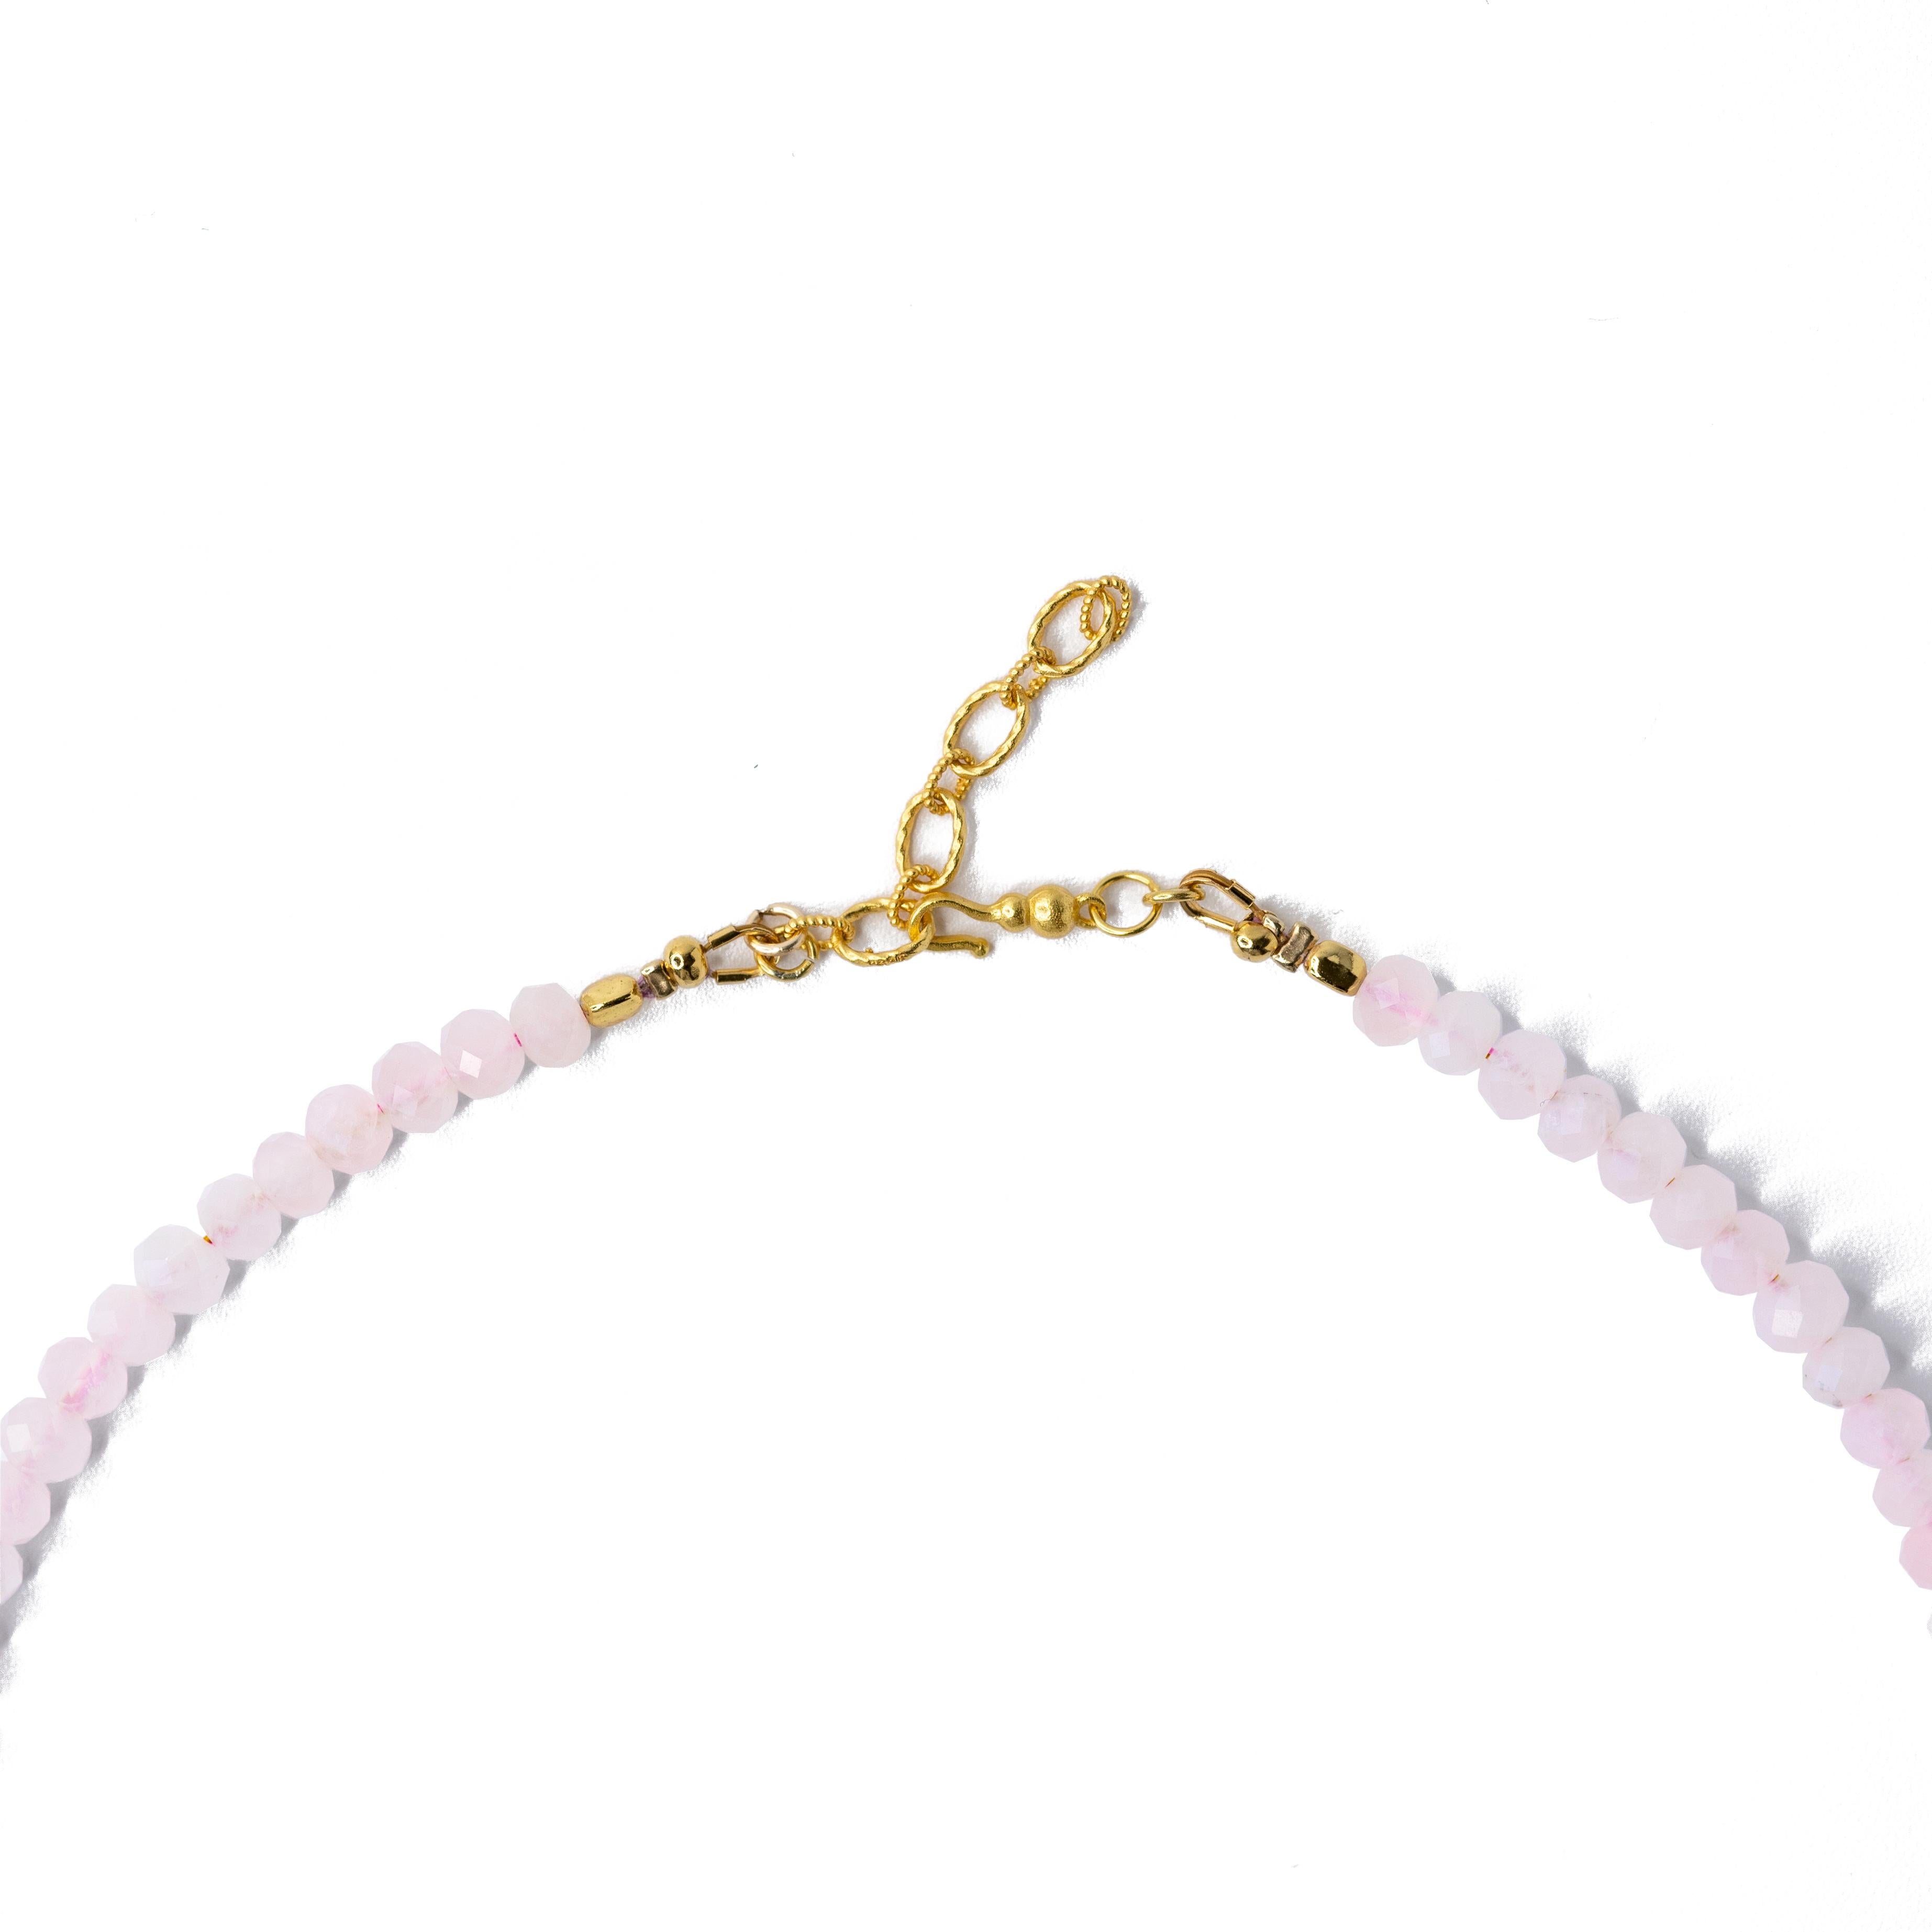 Decorate your neckline with this stunning Rose Quartz Gold Beaded Choker Necklace, handmade to perfection. Its unique design of beads adds a touch of elegance to your outfit, making it a perfect accessory for any casual occasion.

17